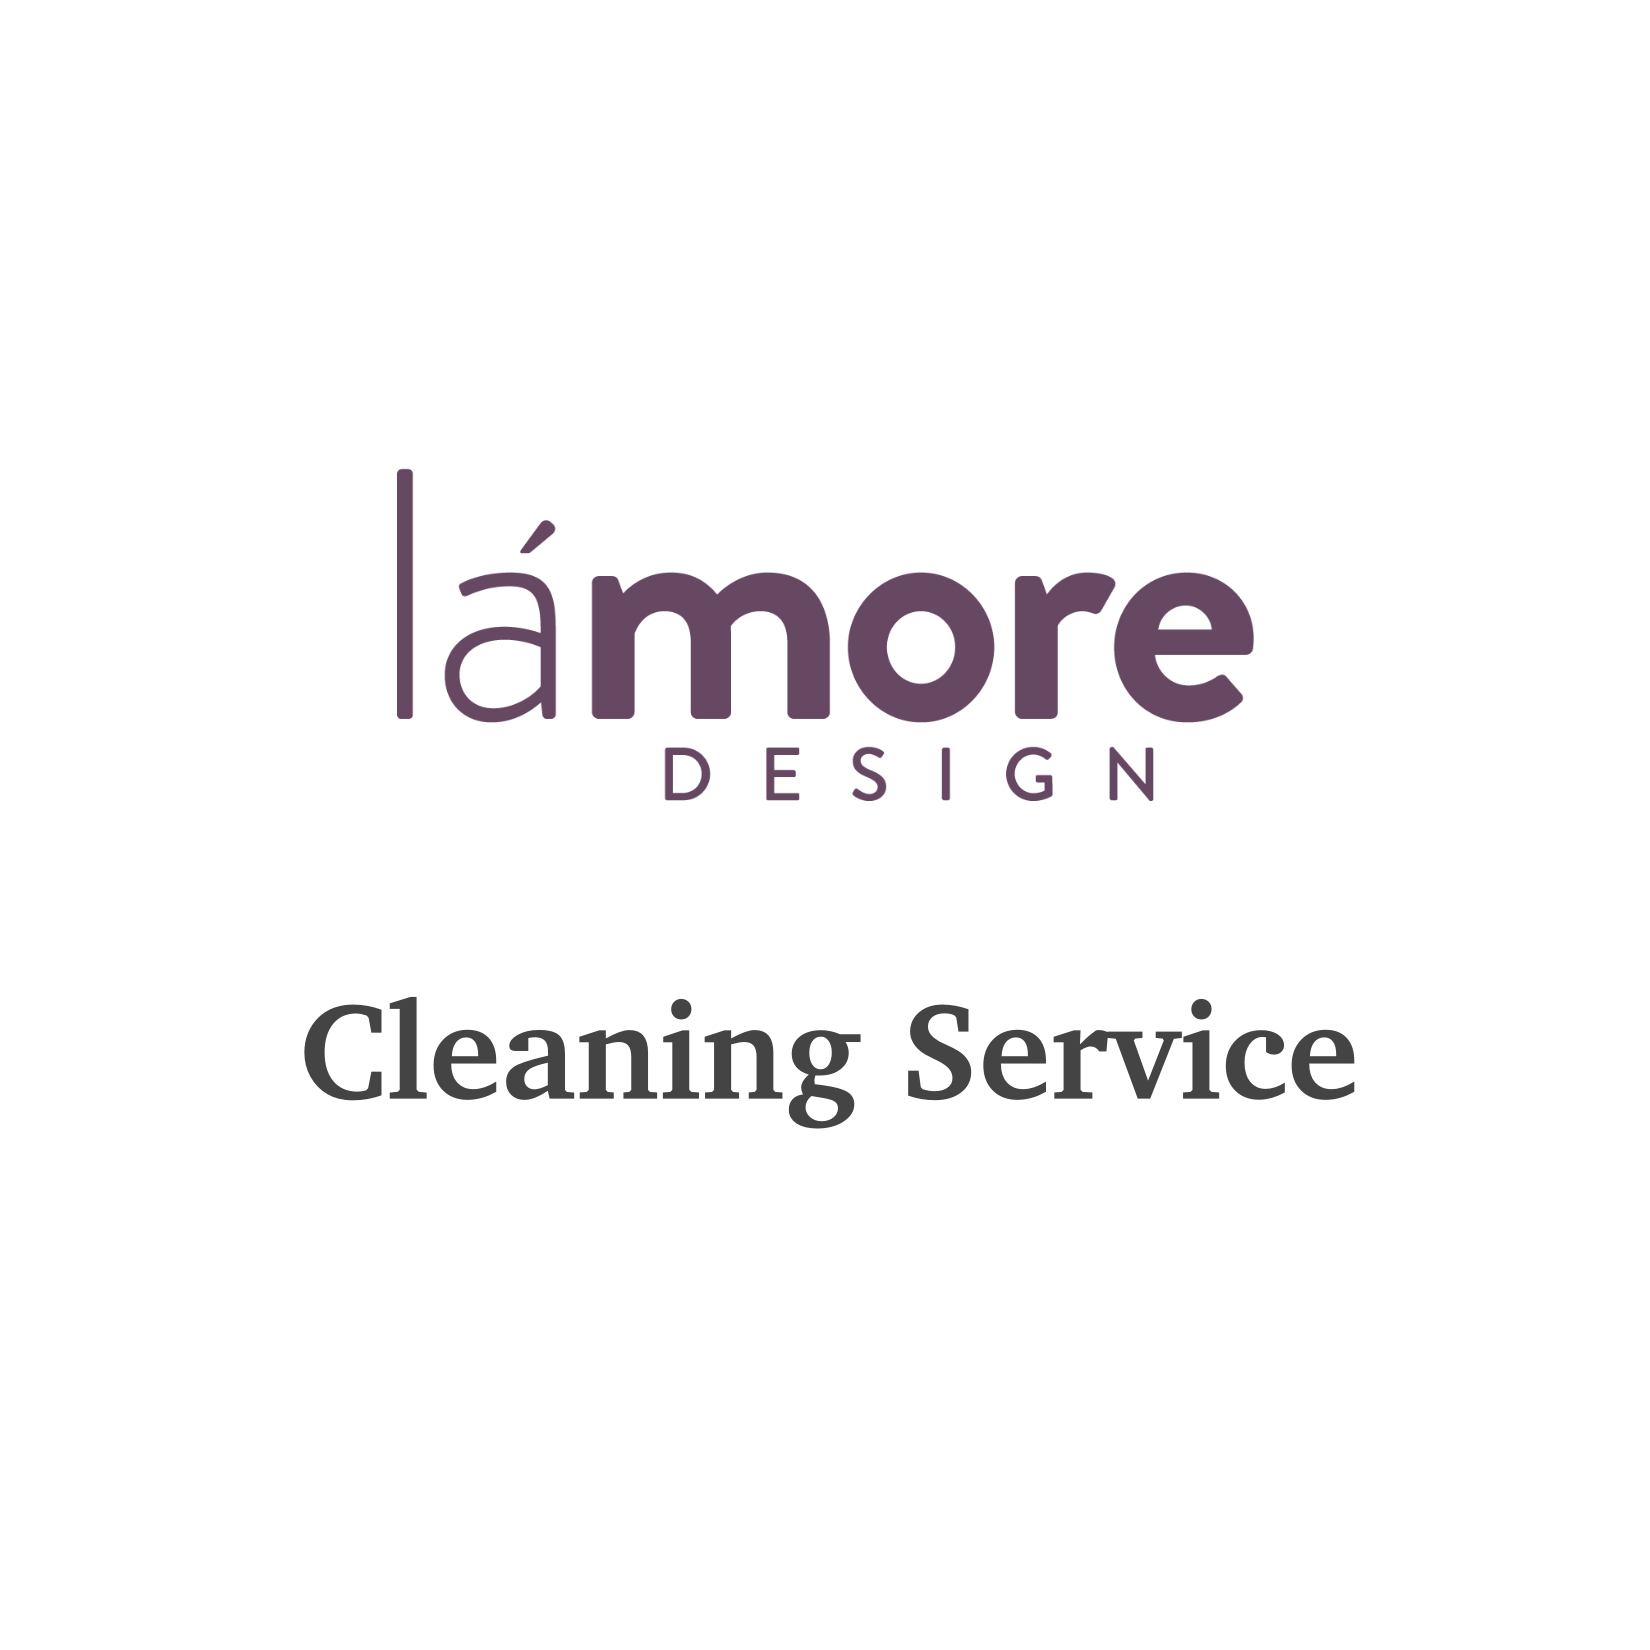 Ring Repairing Service w/ Cleaning Service